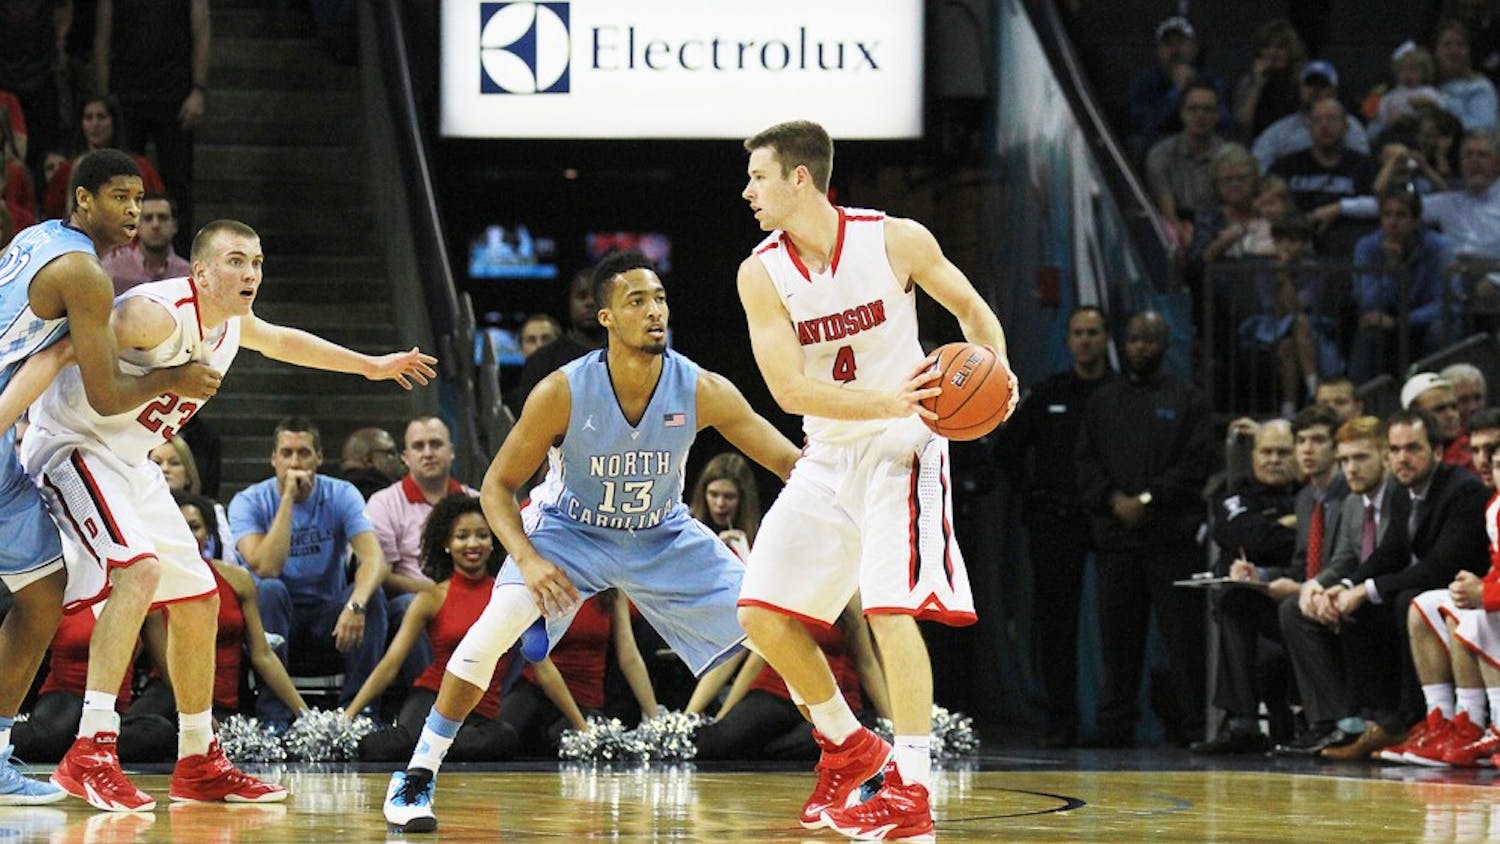 Junior forward J.P. Tokoto defends Davidson senior guard Tyler Kalinoski near the 3-point line during the Tar Heels’ 90-72 victory against the Wildcats Saturday afternoon at Time Warner Cable Arena.